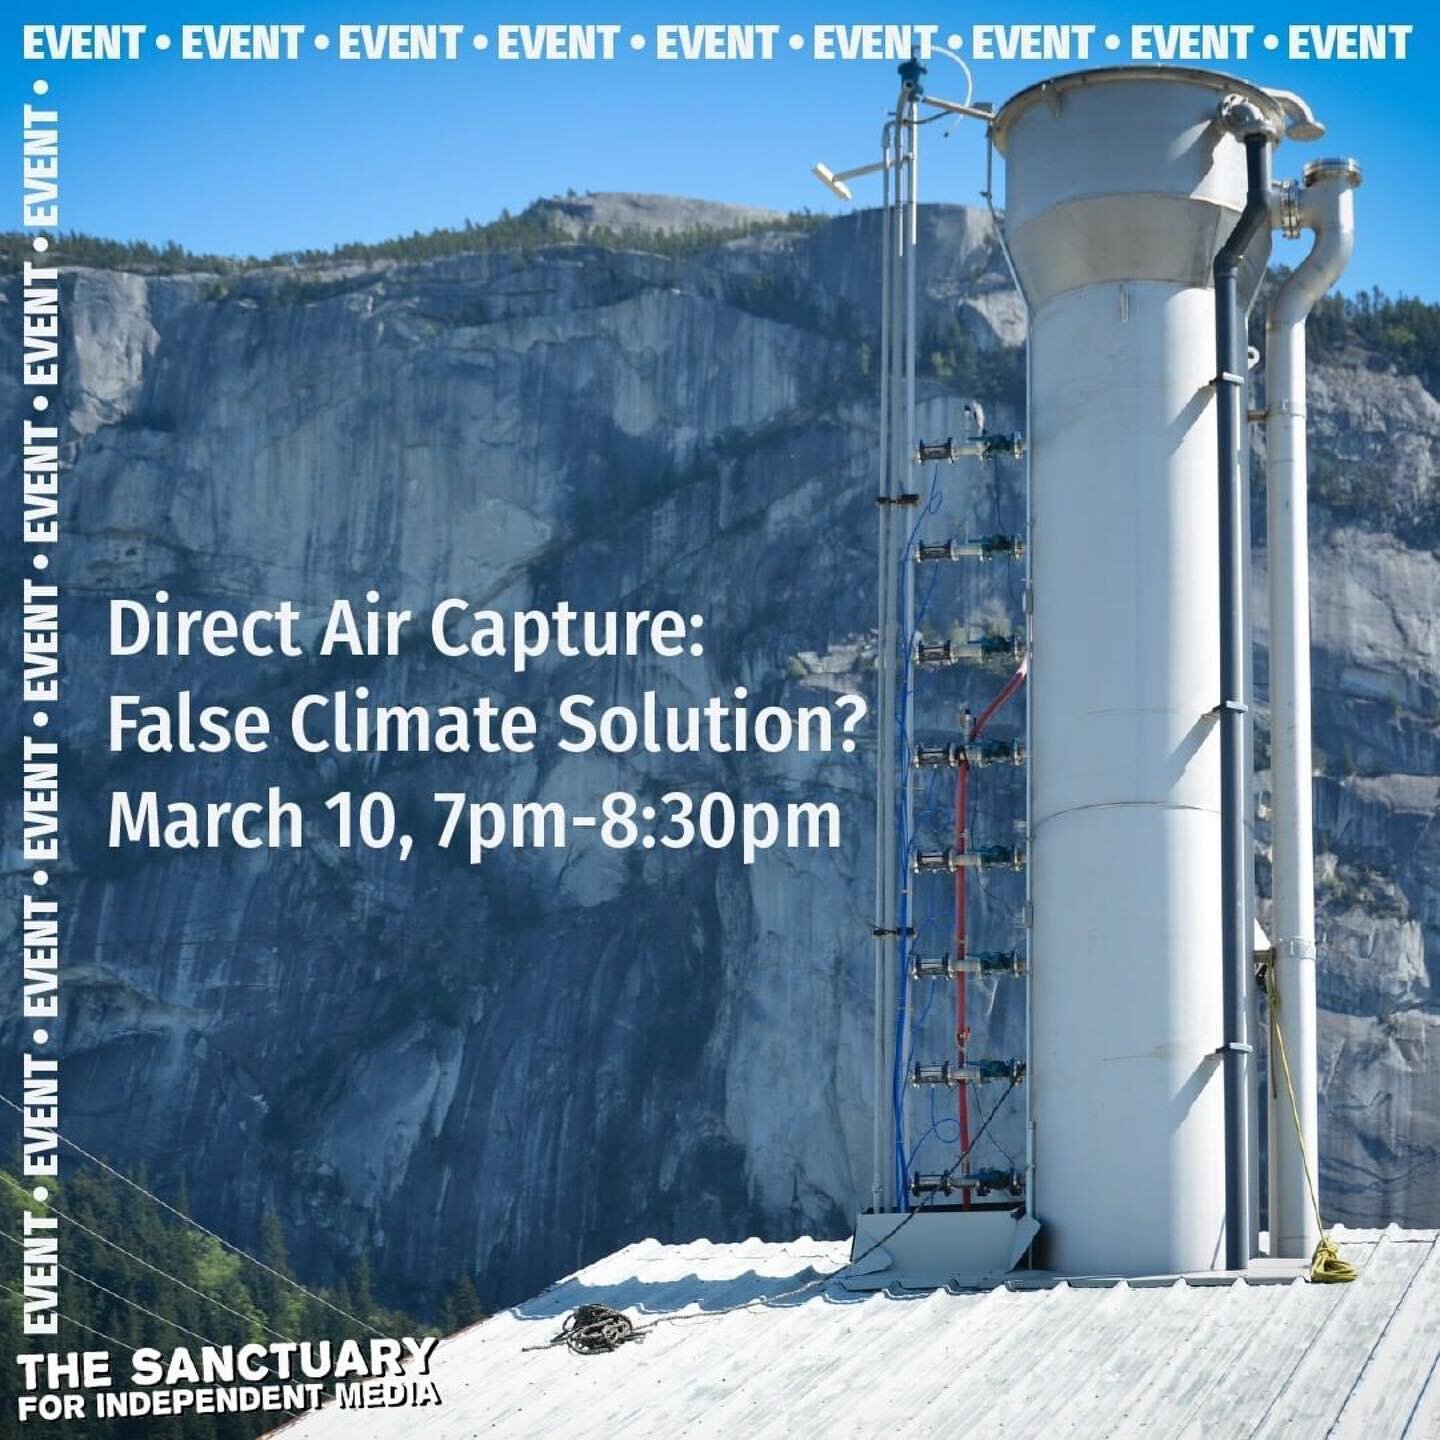 @mediasanctuary is hosting a town hall webinar (3/10 - 7pm) on the costs, dangers, and questionable methods of Direct Air Capture (DAC) &mdash; and why it&rsquo;s an unwise investment. Registration link in bio. 

#Repost @mediasanctuary
・・・
Speakers 